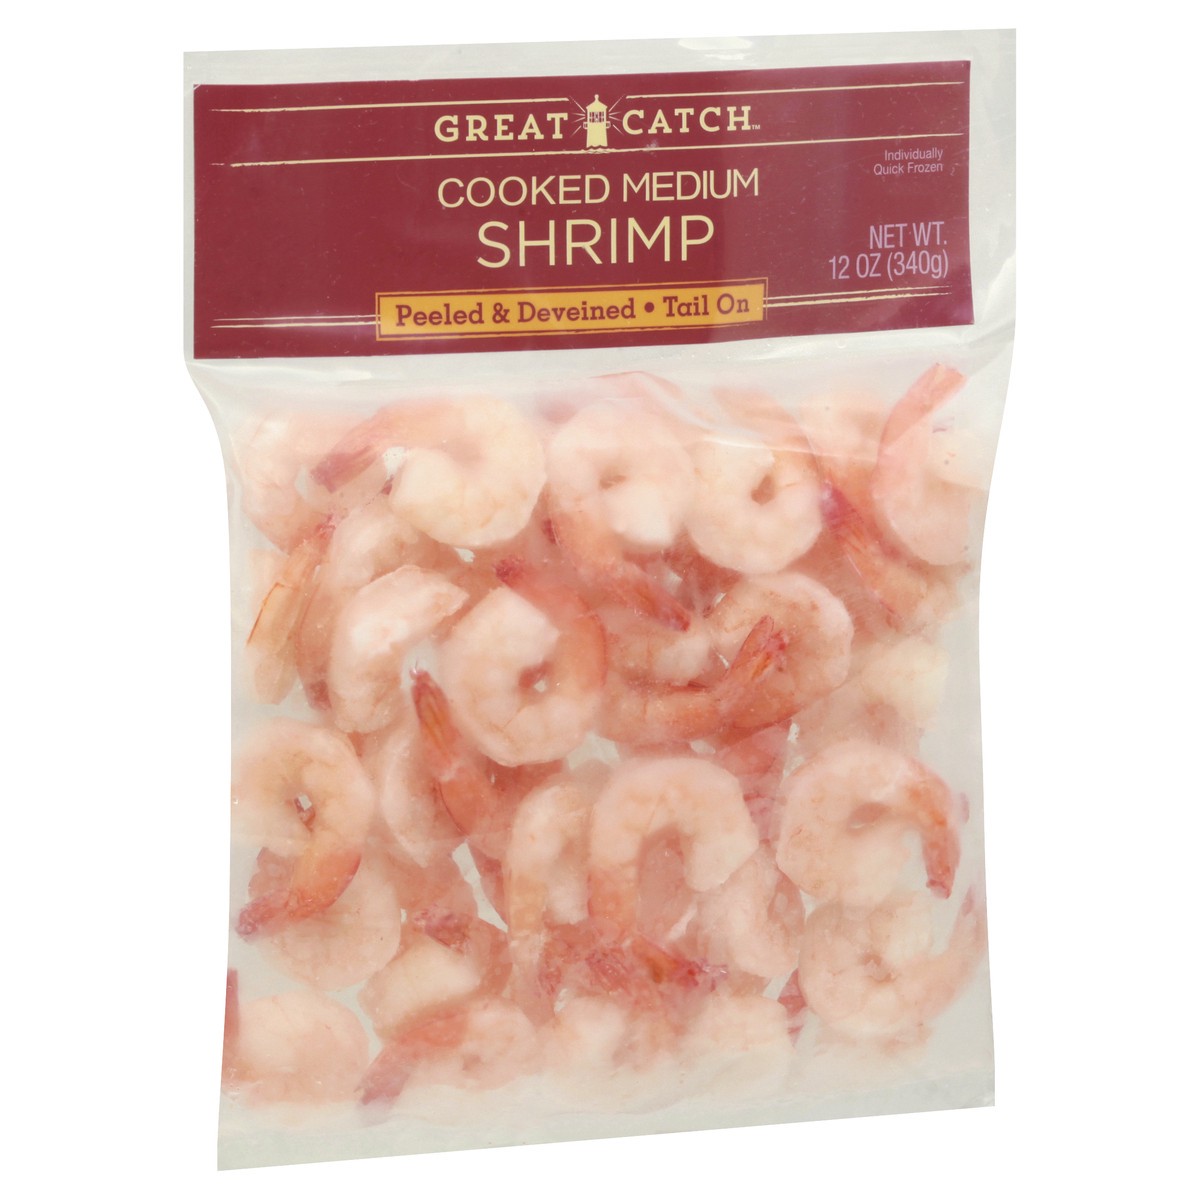 slide 8 of 13, Great Catch Chicken of the Sea Tail Off Cooked Shrimp, 61-70 count, 12 oz